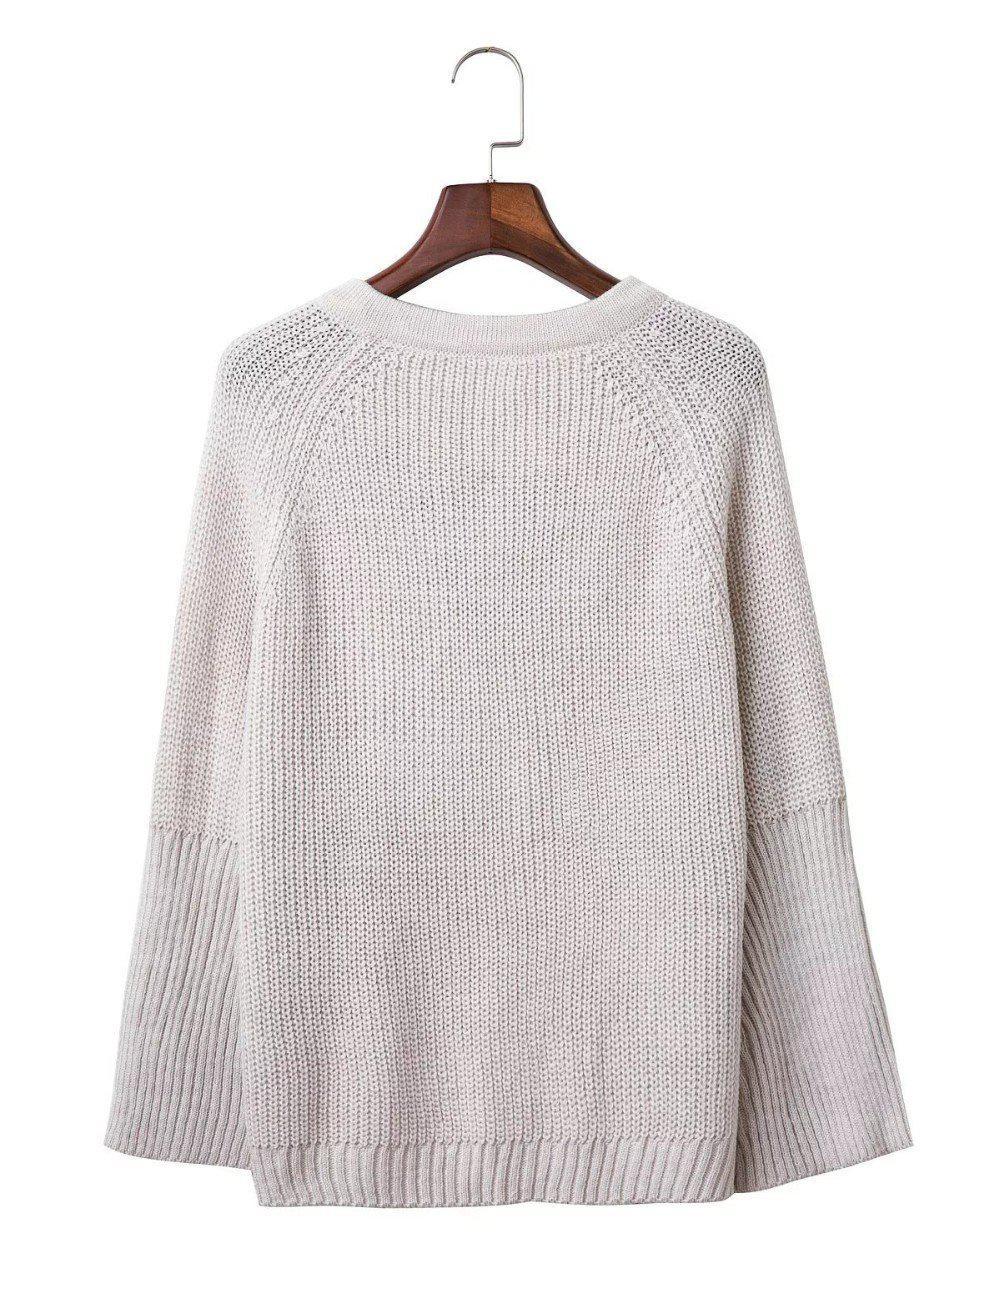 SW158 Autumn Winter Flare Sleeve Knitted Women Sweater Lace up V Neck